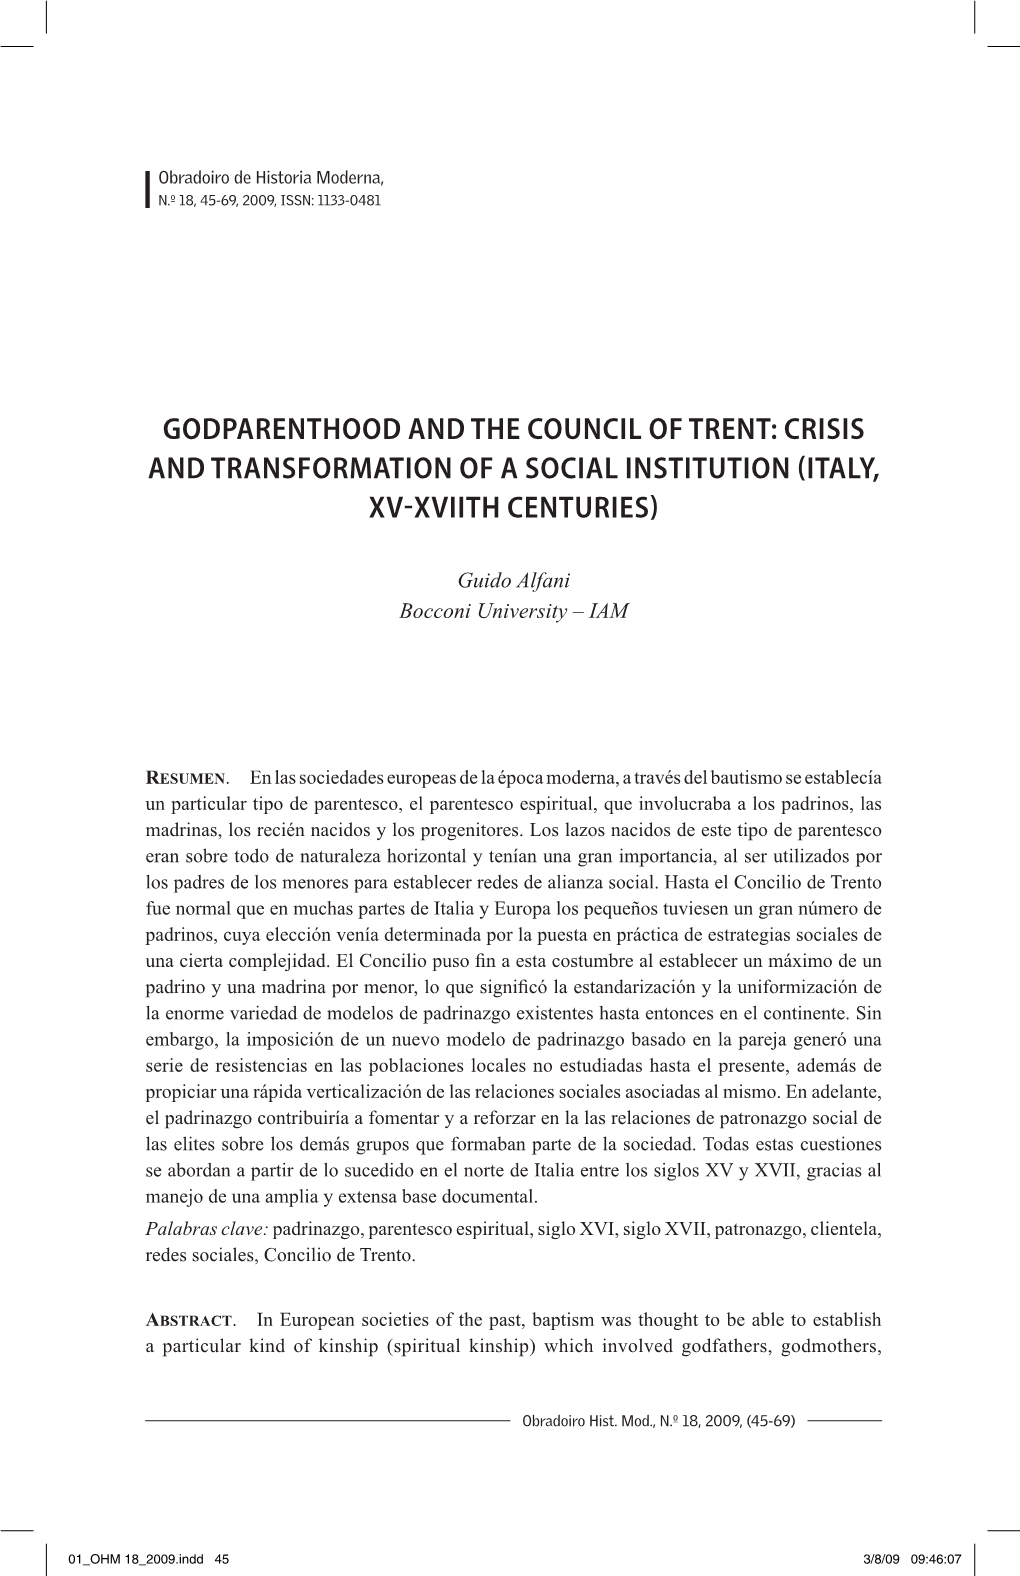 GODPARENTHOOD and the COUNCIL of TRENT: CRISIS and TRANSFORMATION of a SOCIAL INSTITUTION (ITALY, XV-Xviith CENTURIES)